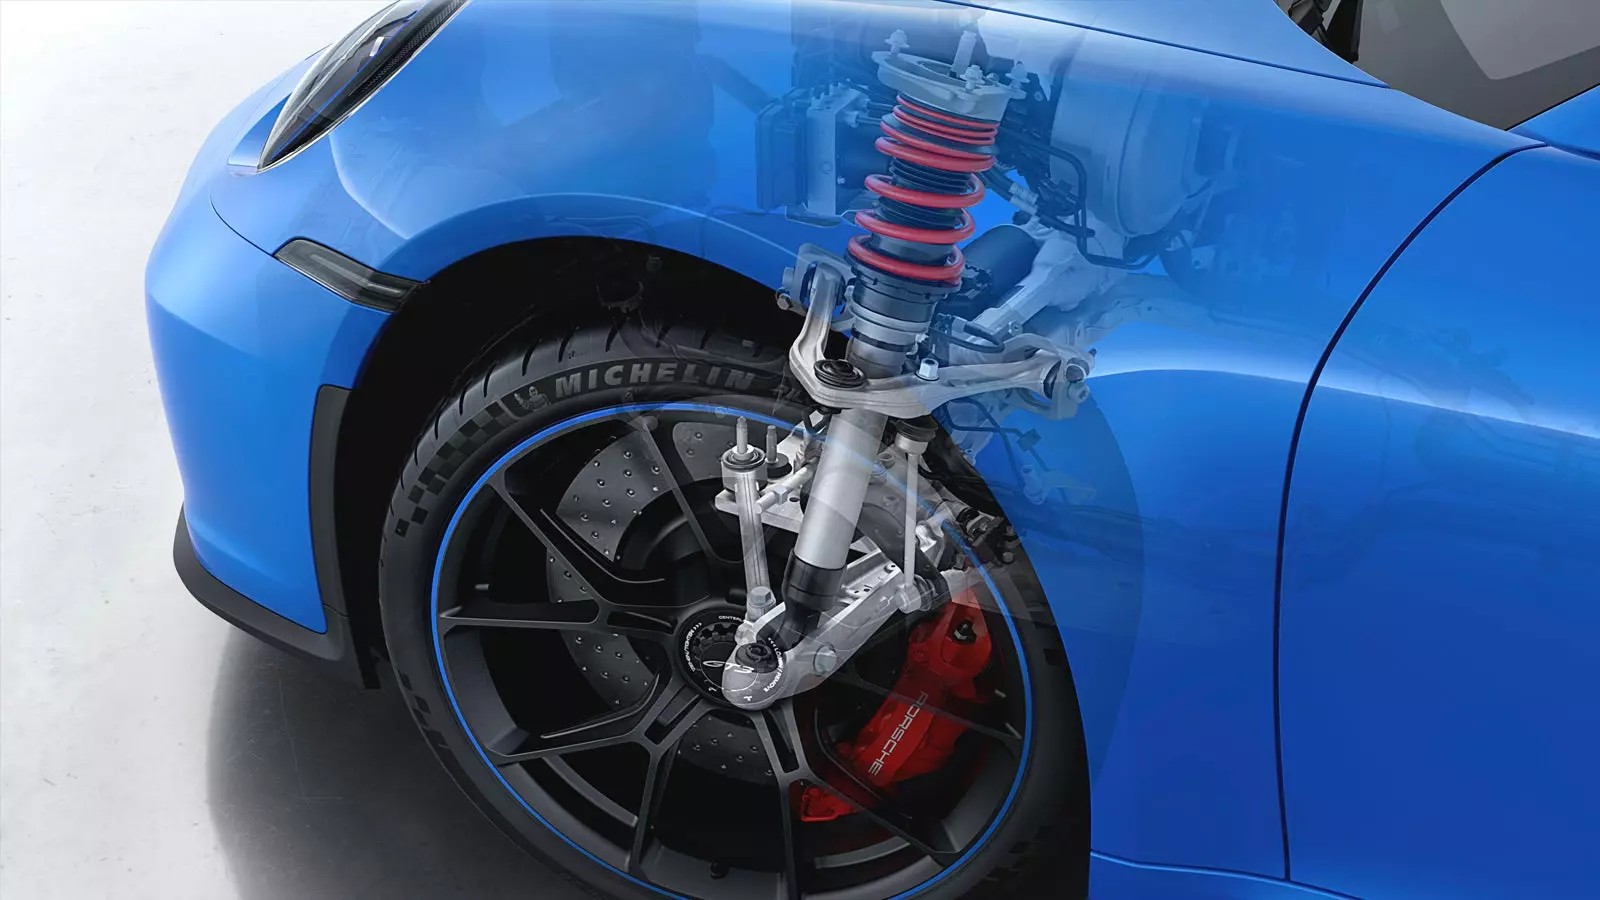 The Significance of Double Wishbone Suspension, Which Miatas and Civics Had Before the 911 GT3